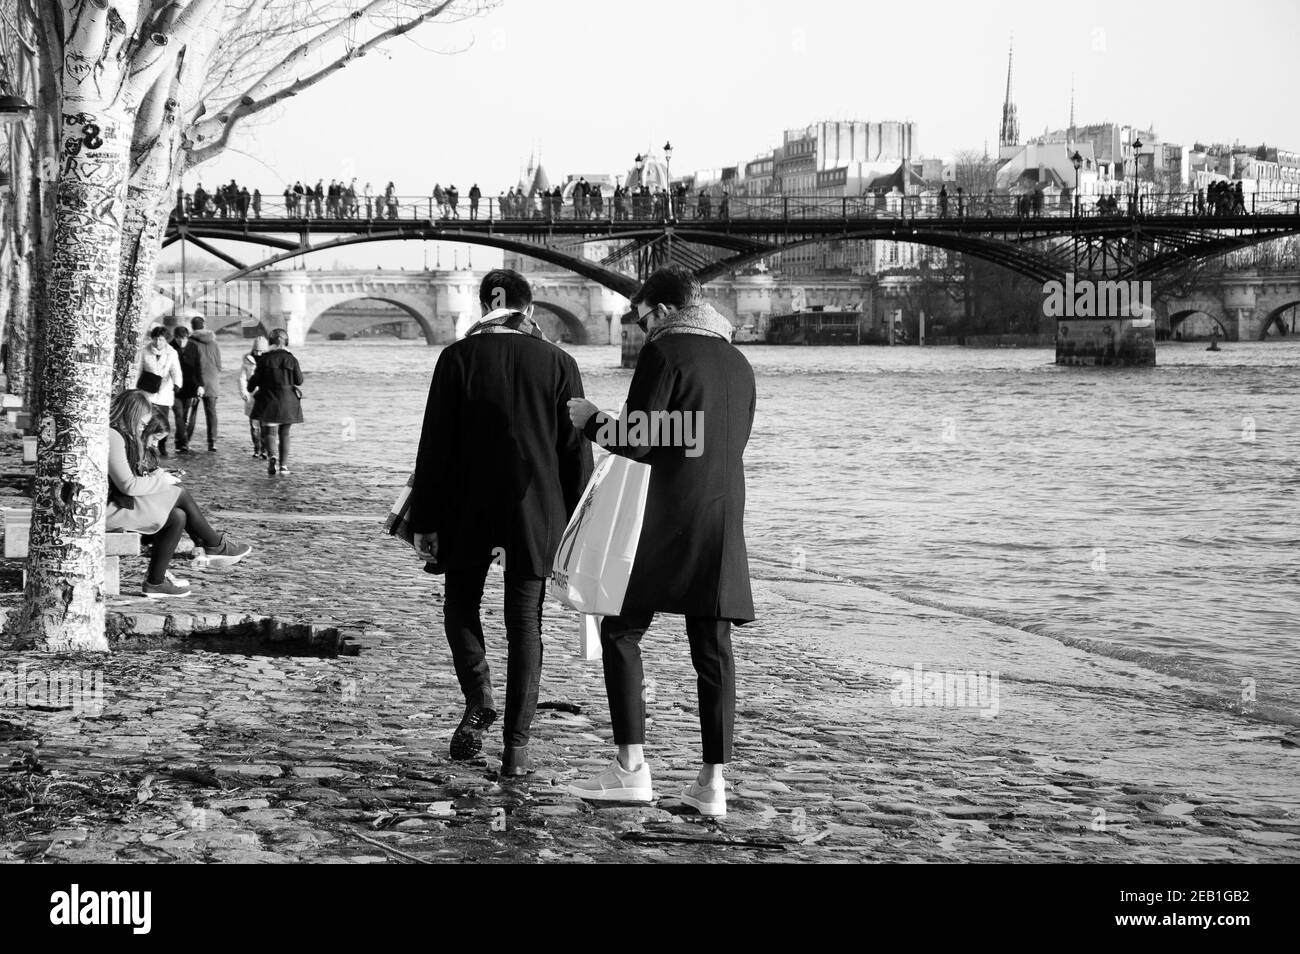 PARIS, FRANCE - JANUARY 14, 2018: Flood in Paris. Parisians and tourists promenade along wet embankment while high water in Seine river coming over qu Stock Photo